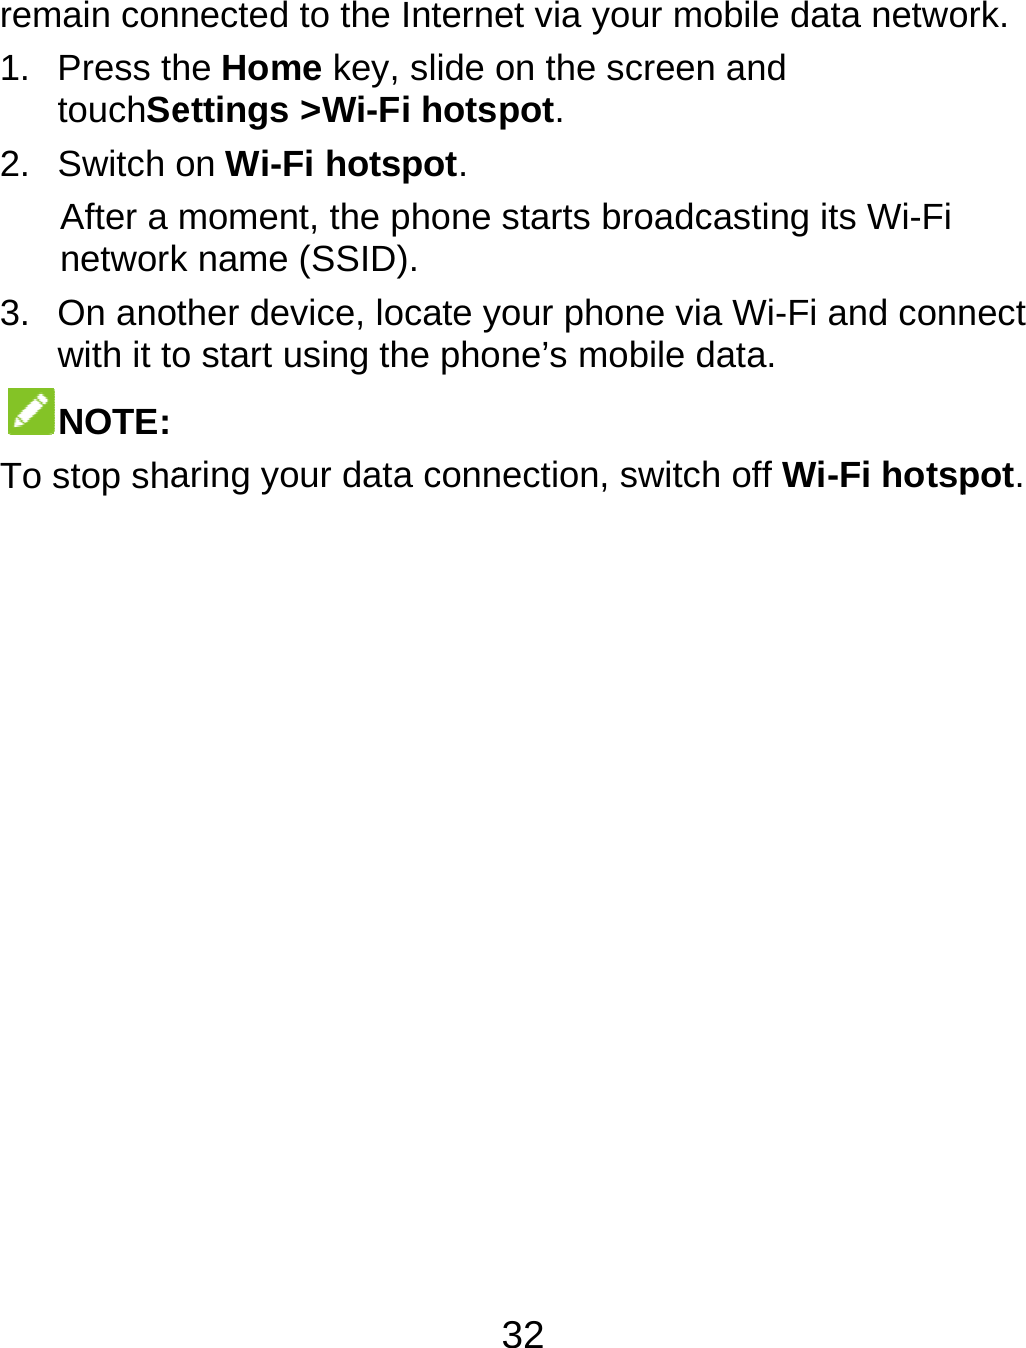  remain con1. Press thtouchSe2. Switch oAfter a network3. On anotwith it toNOTE: To stop shanected to the Inthe Home key, sliettings &gt;Wi-Fi hon Wi-Fi hotspomoment, the phok name (SSID). ther device, locao start using the aring your data c32 ternet via your mide on the screenhotspot.   ot.   one starts broadcate your phone viphone’s mobile dconnection, switcobile data netwon and casting its Wi-Fi a Wi-Fi and conndata. h off Wi-Fi hotspork. nect pot. 